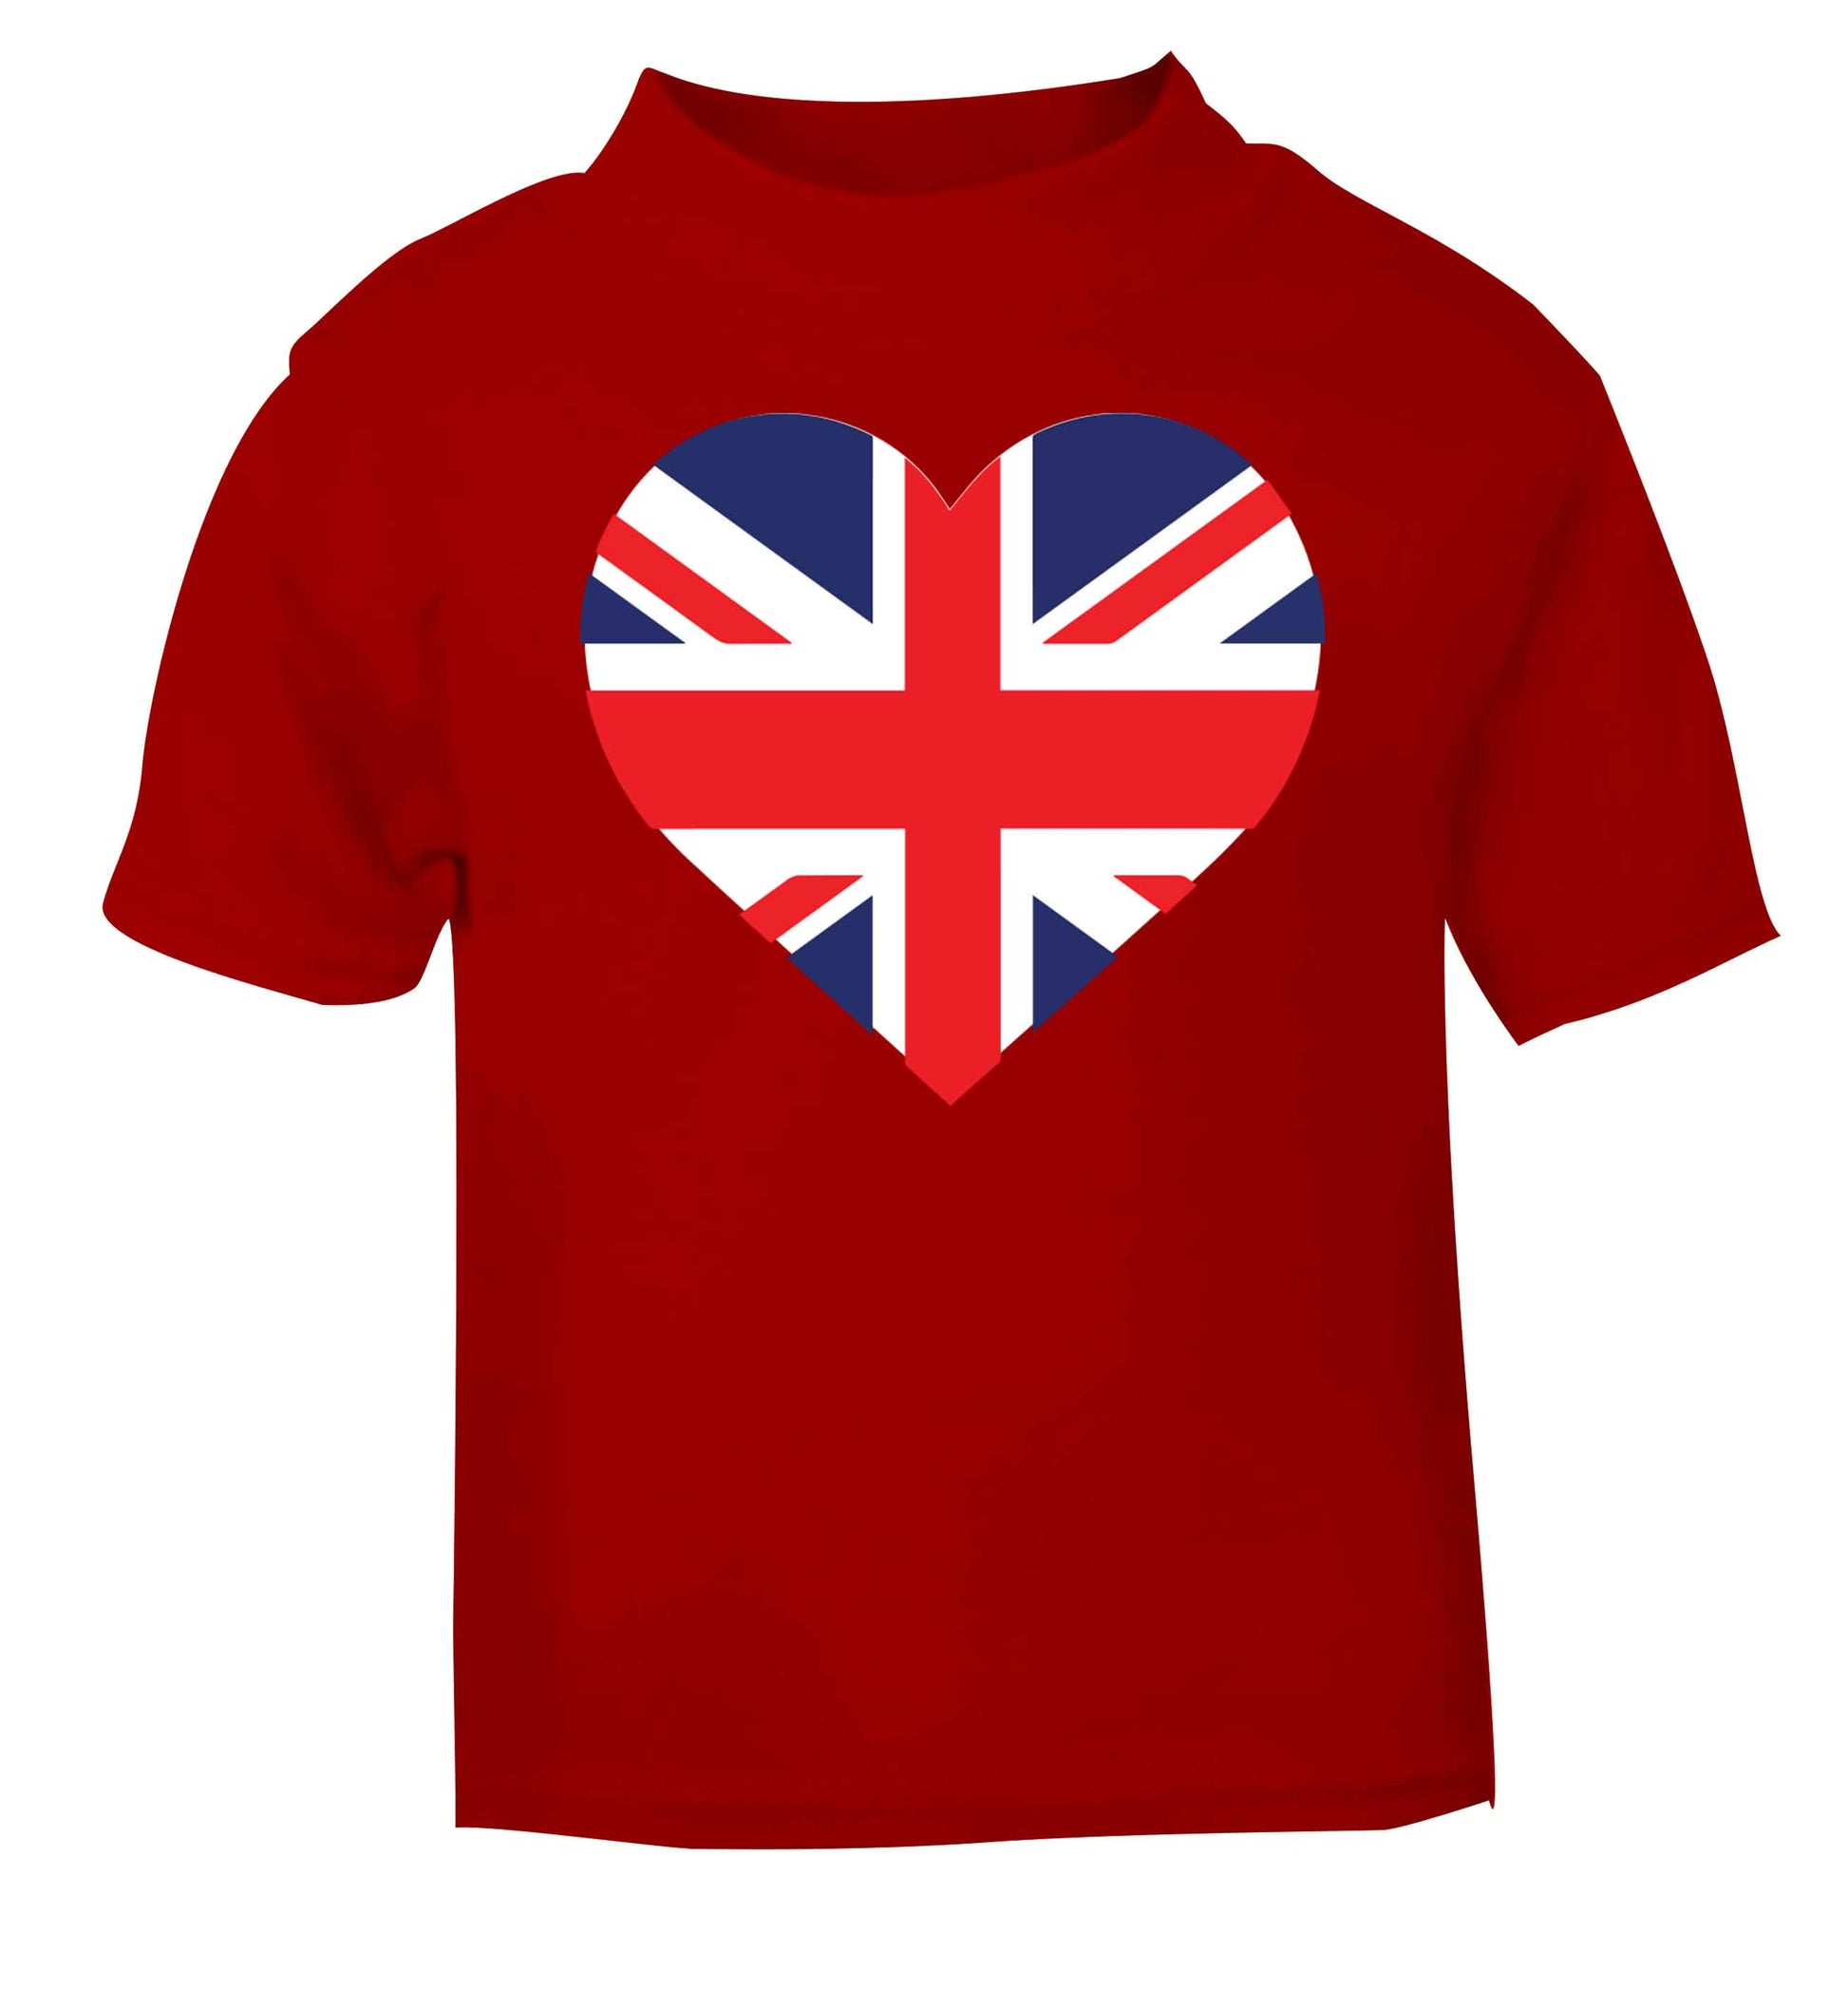 Union Jack Heart red baby toddler Tshirt 2 Years